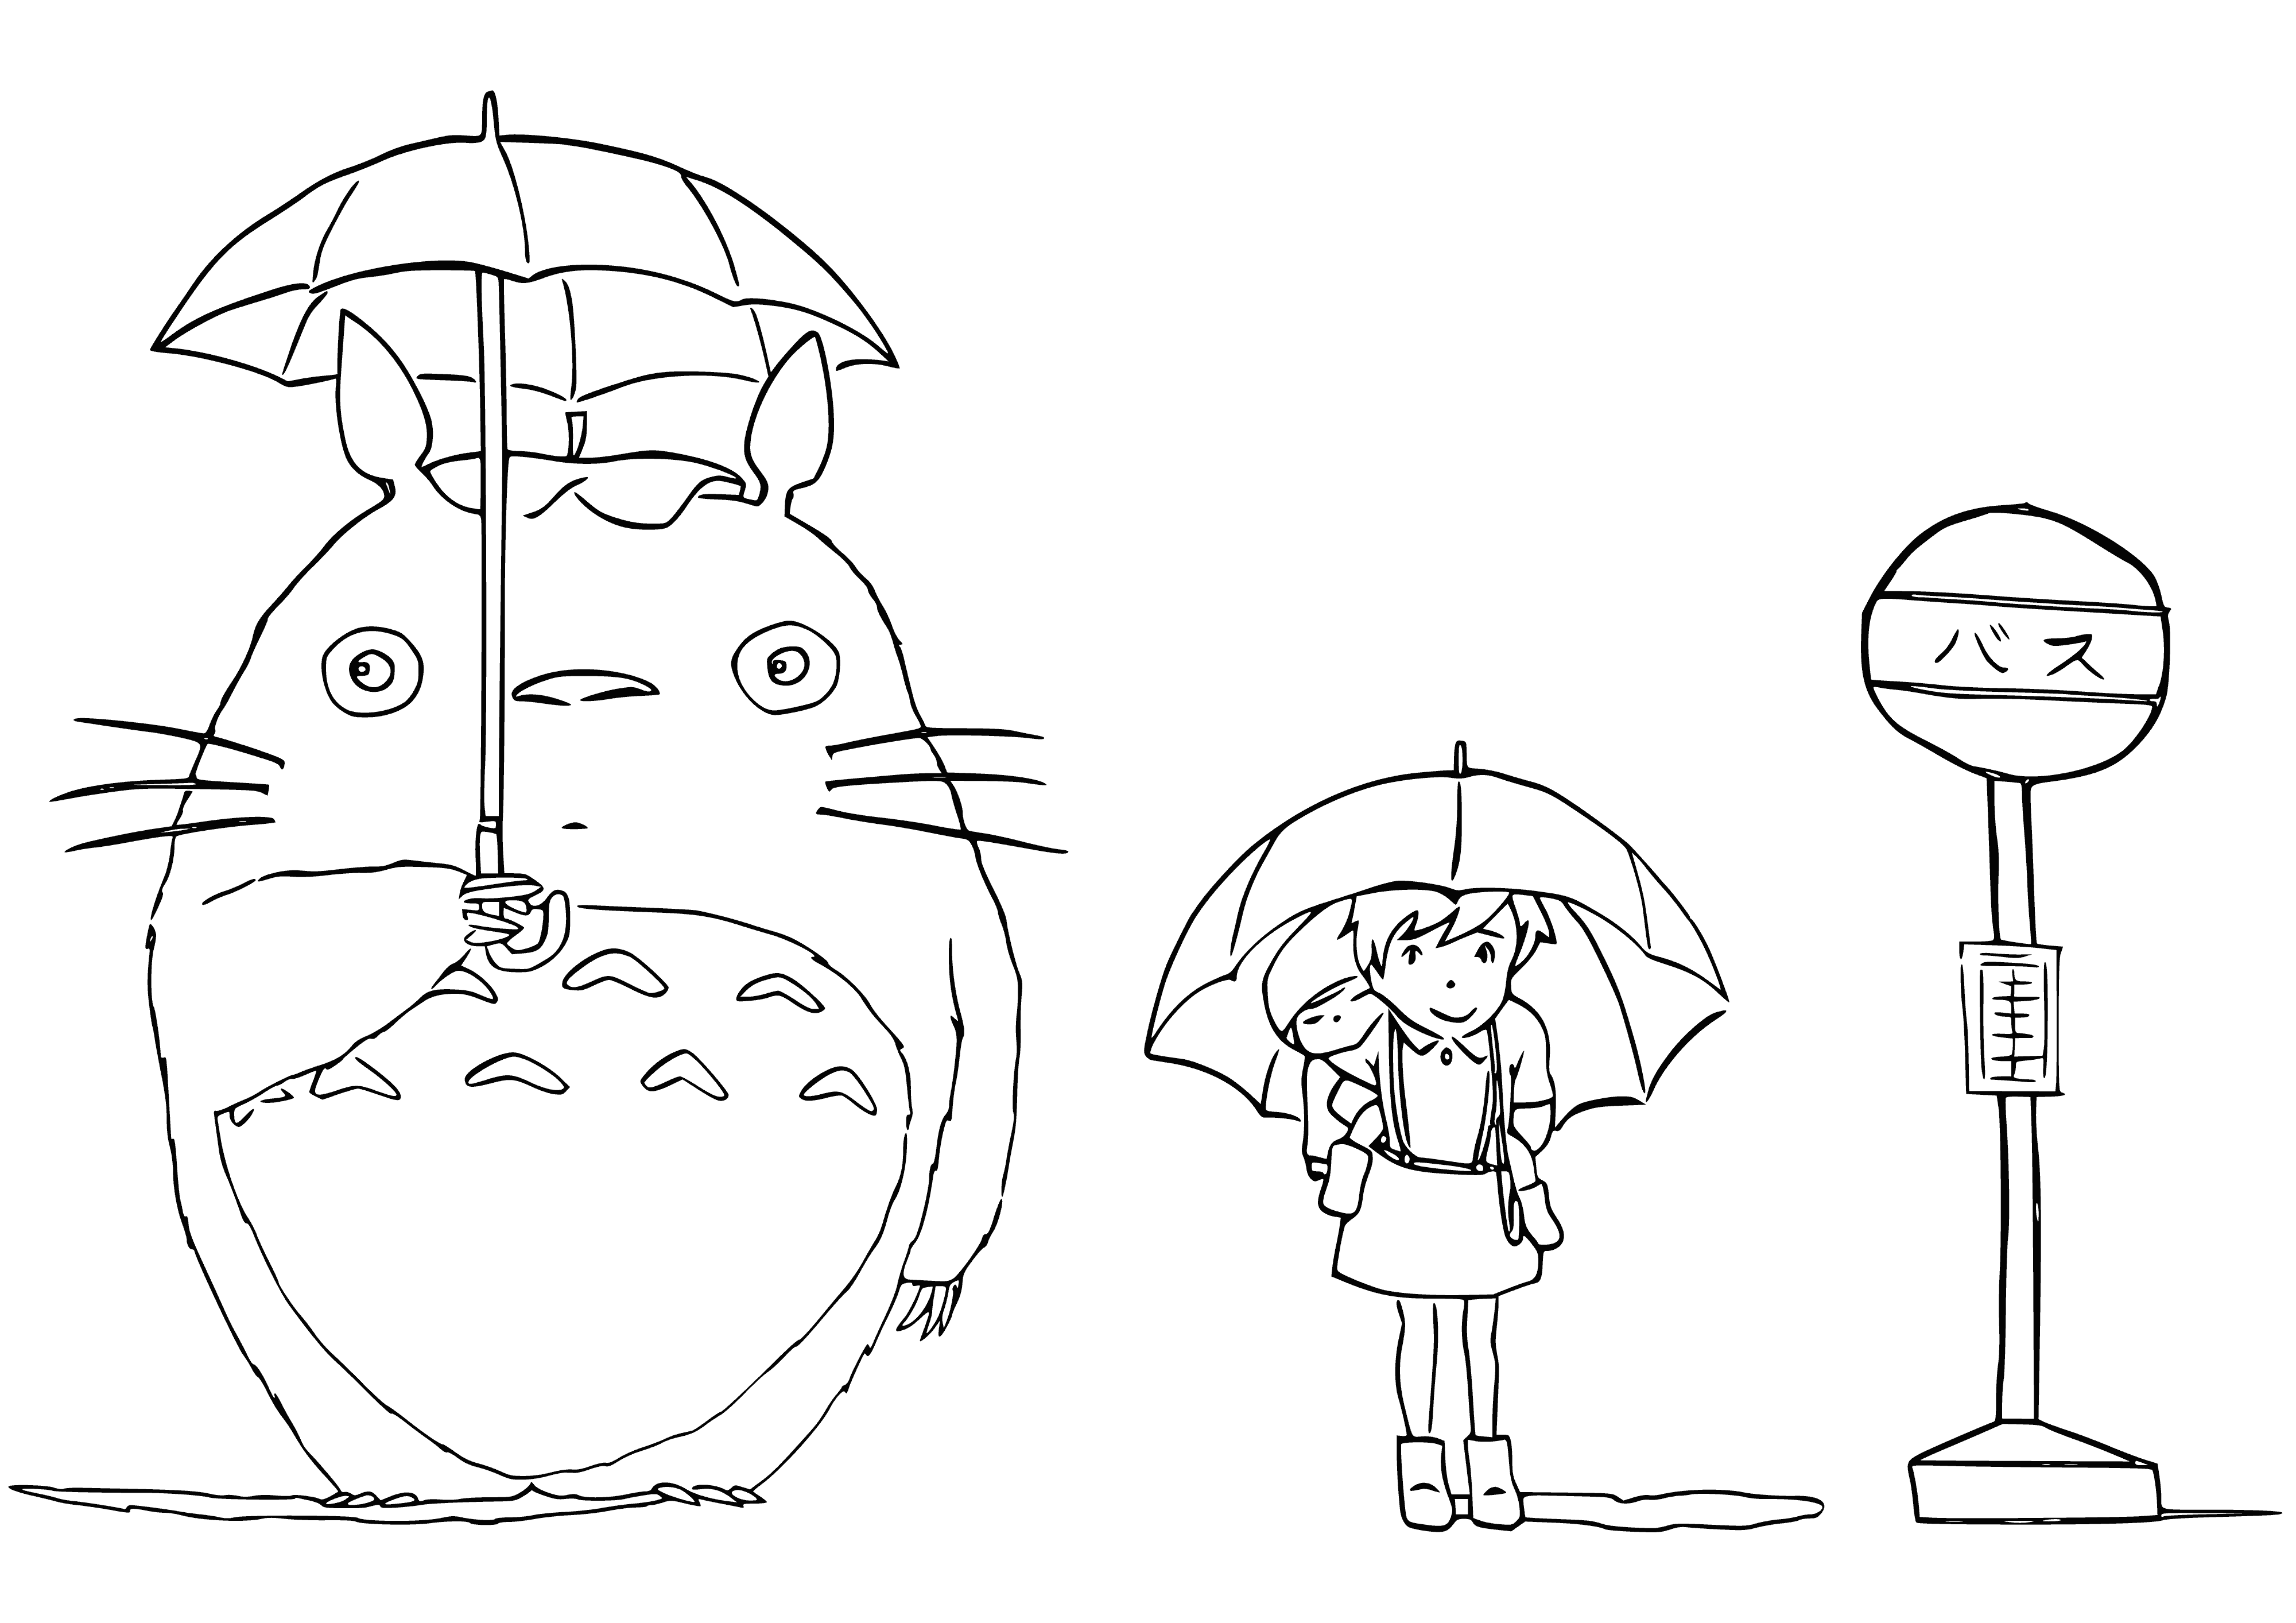 coloring page: Satsuki and Totoro sit in the woods. Totoro's furry, big-eared, bushy-tailed figure contrasts Satsuki's small figure dressed in red.